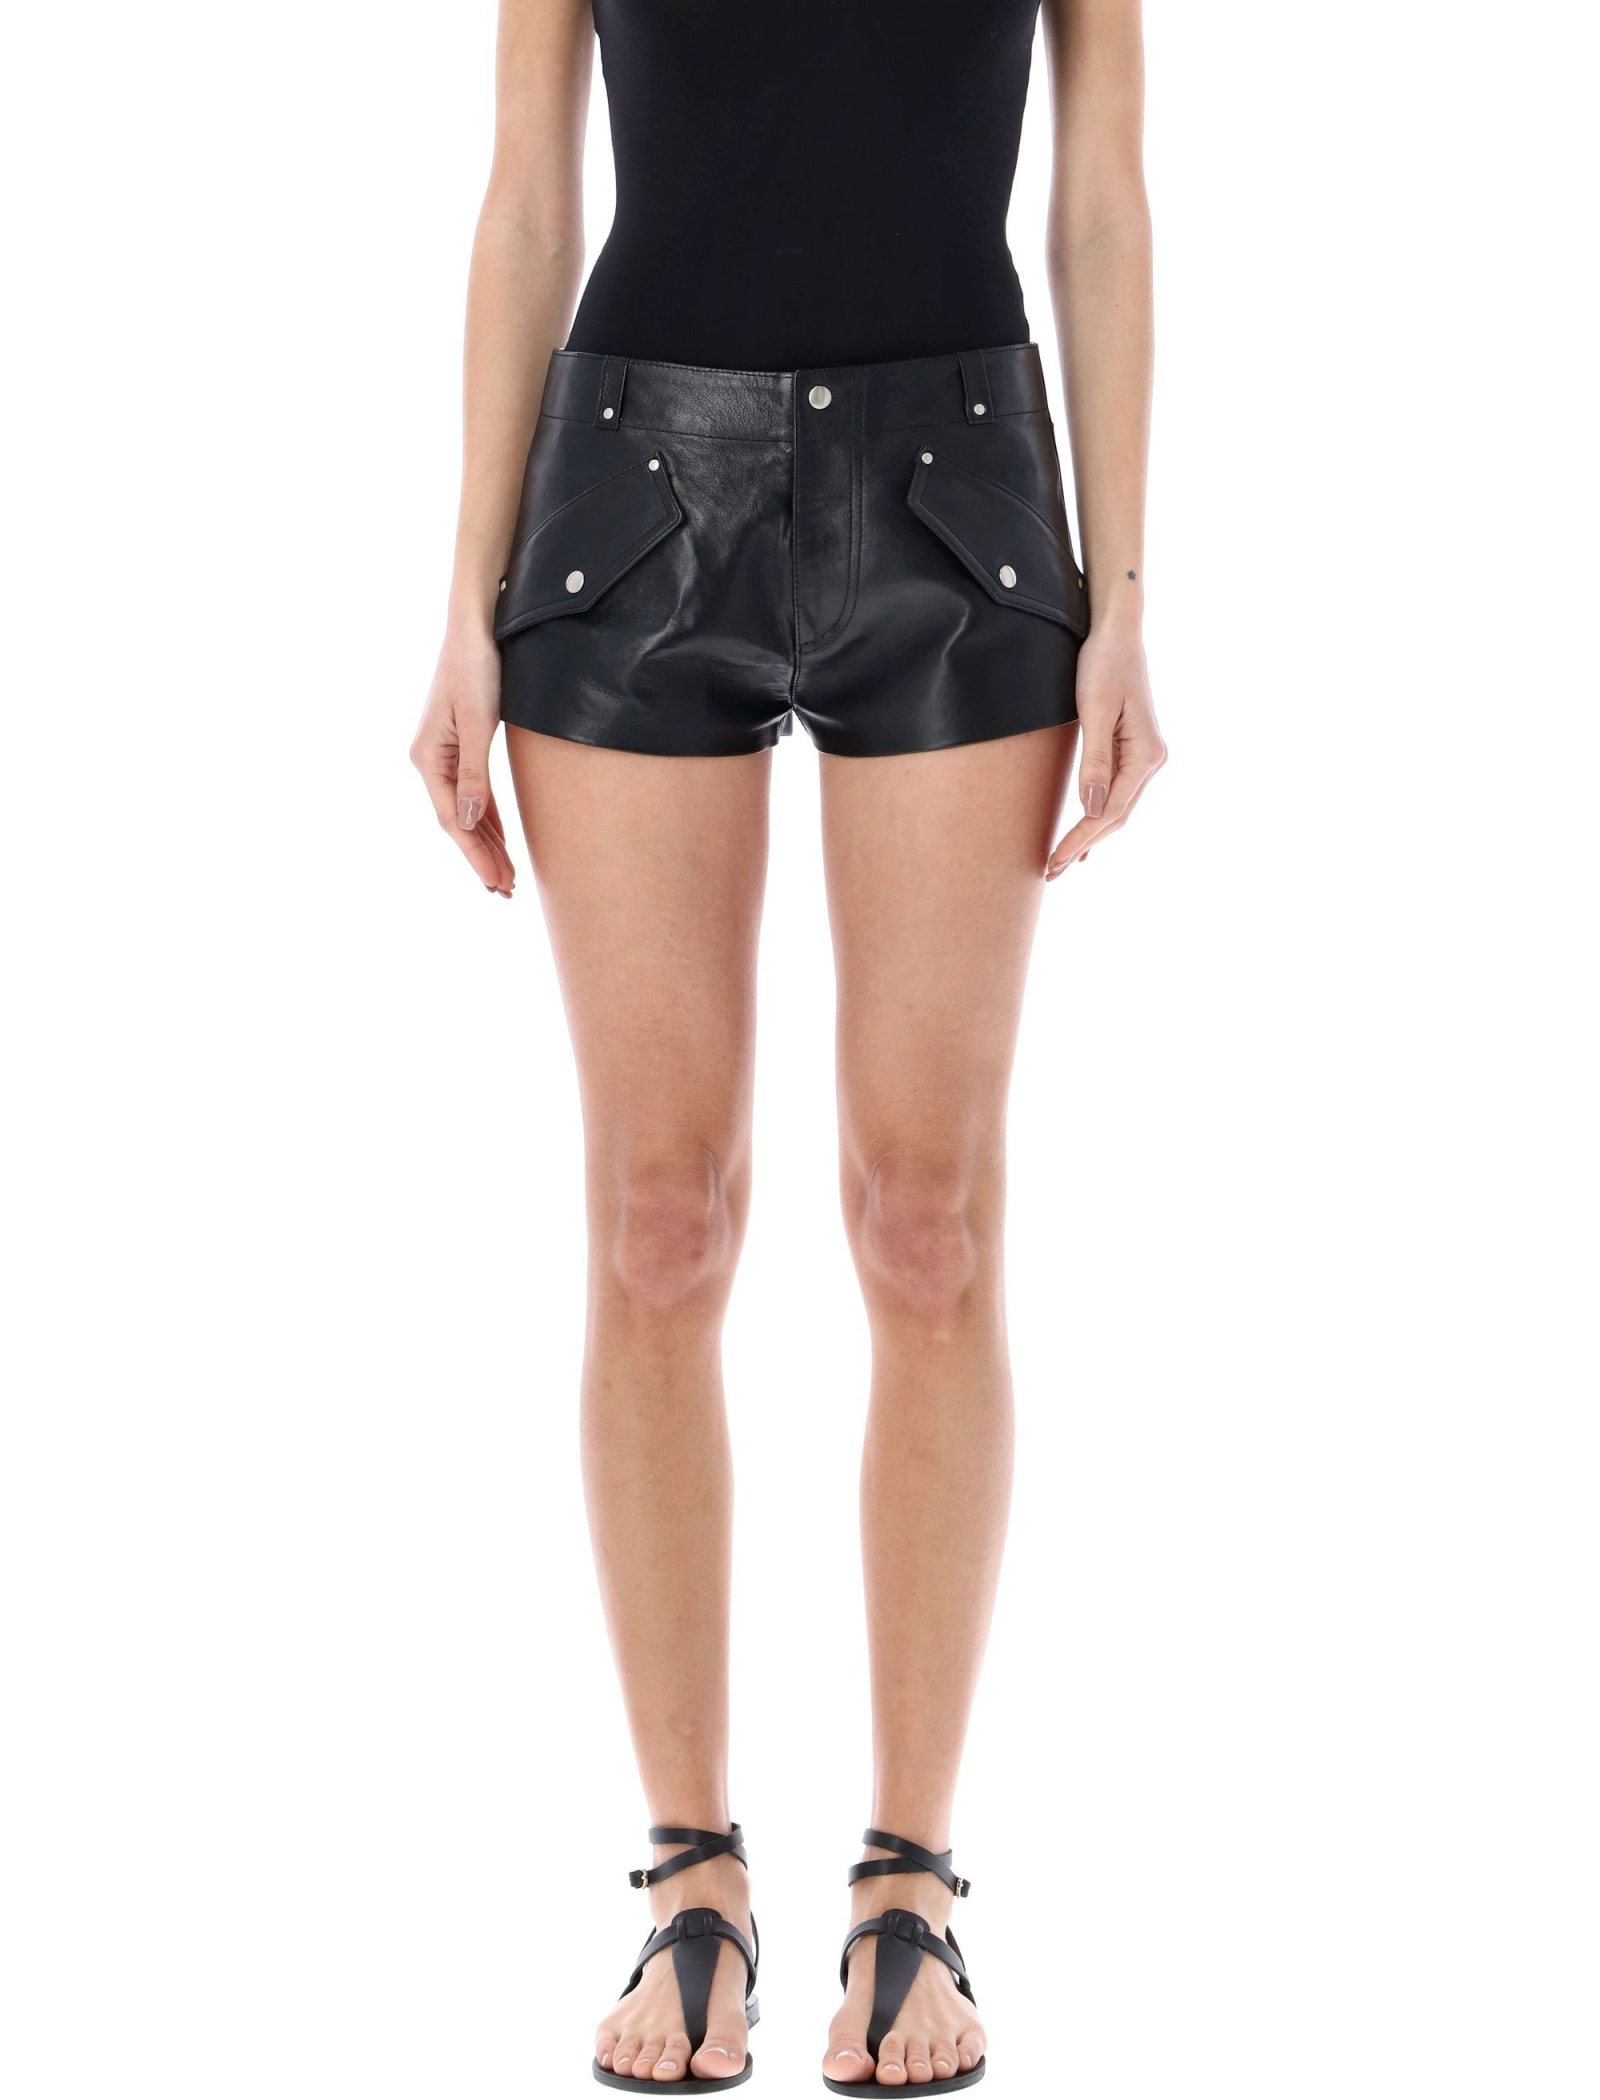 DURAZZI MILANO LEATHER SHORT PANTS WITH FRONT FLAP POCKETS